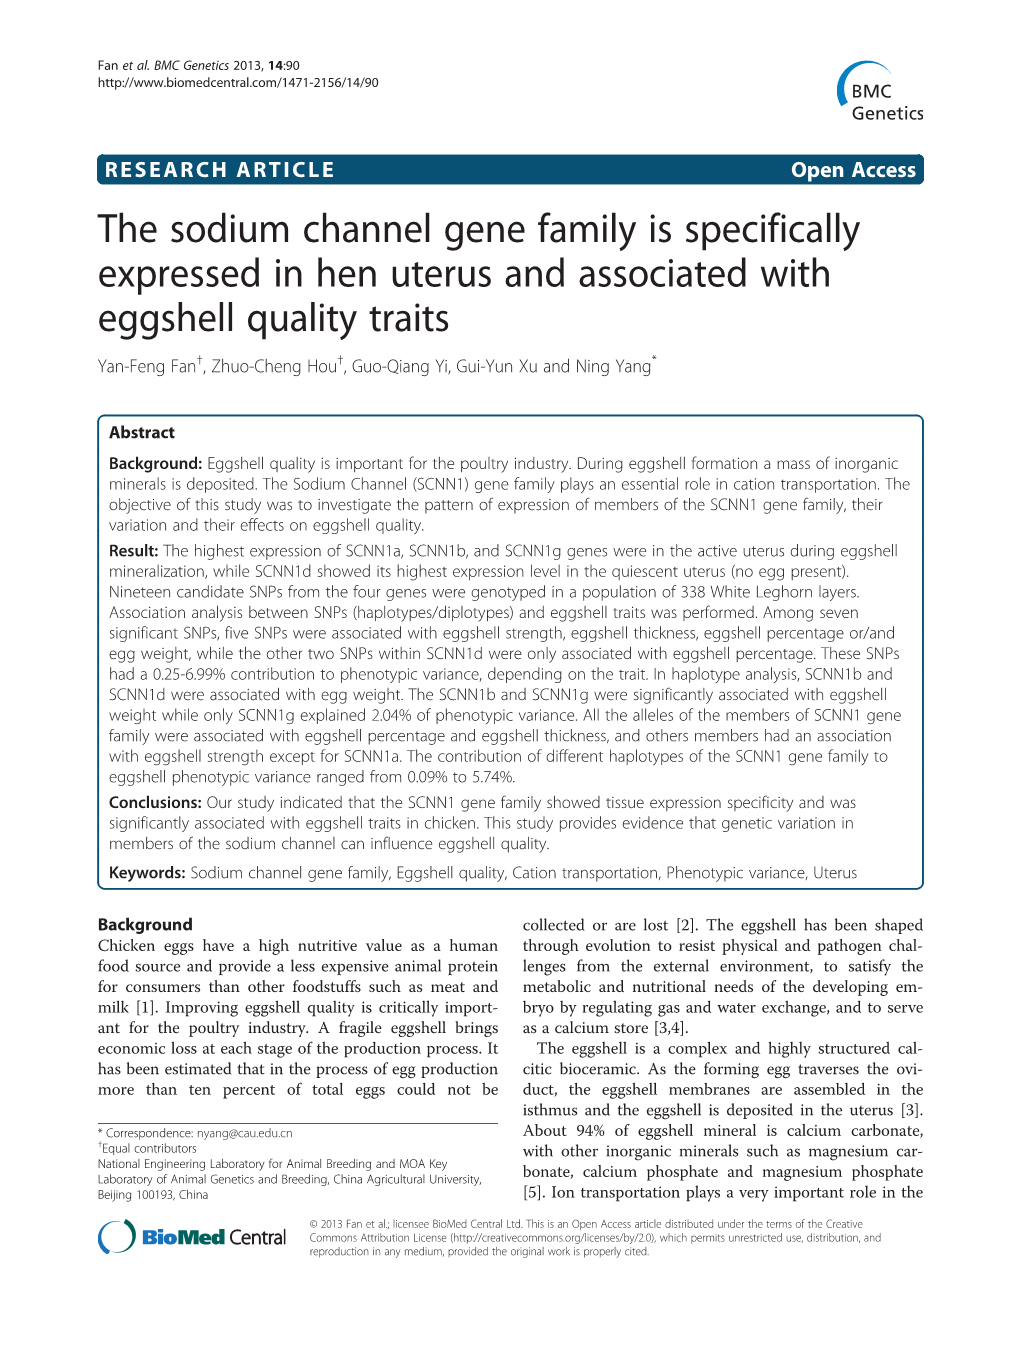 The Sodium Channel Gene Family Is Specifically Expressed in Hen Uterus